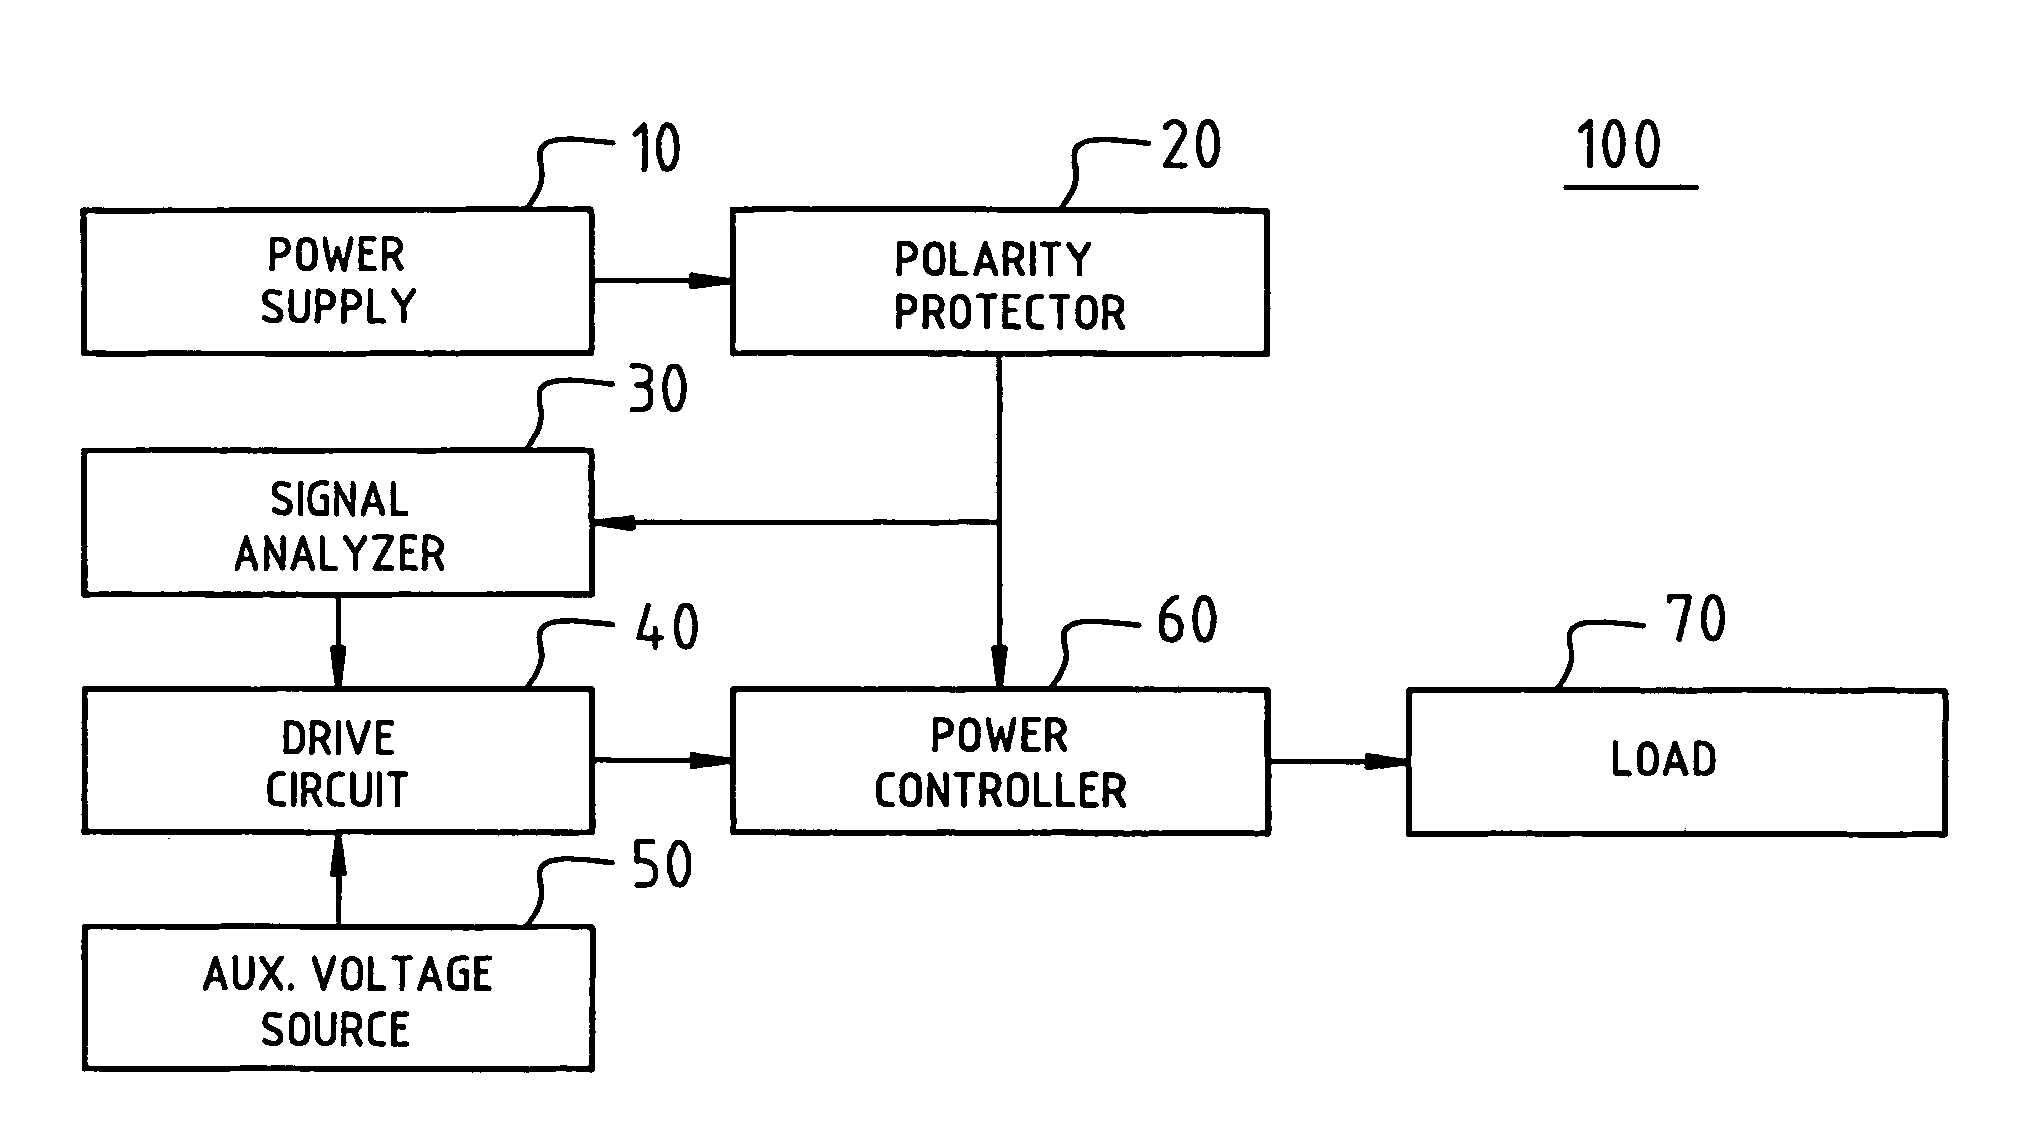 Protective circuit for reducing electrical disturbances during operation of a DC motor